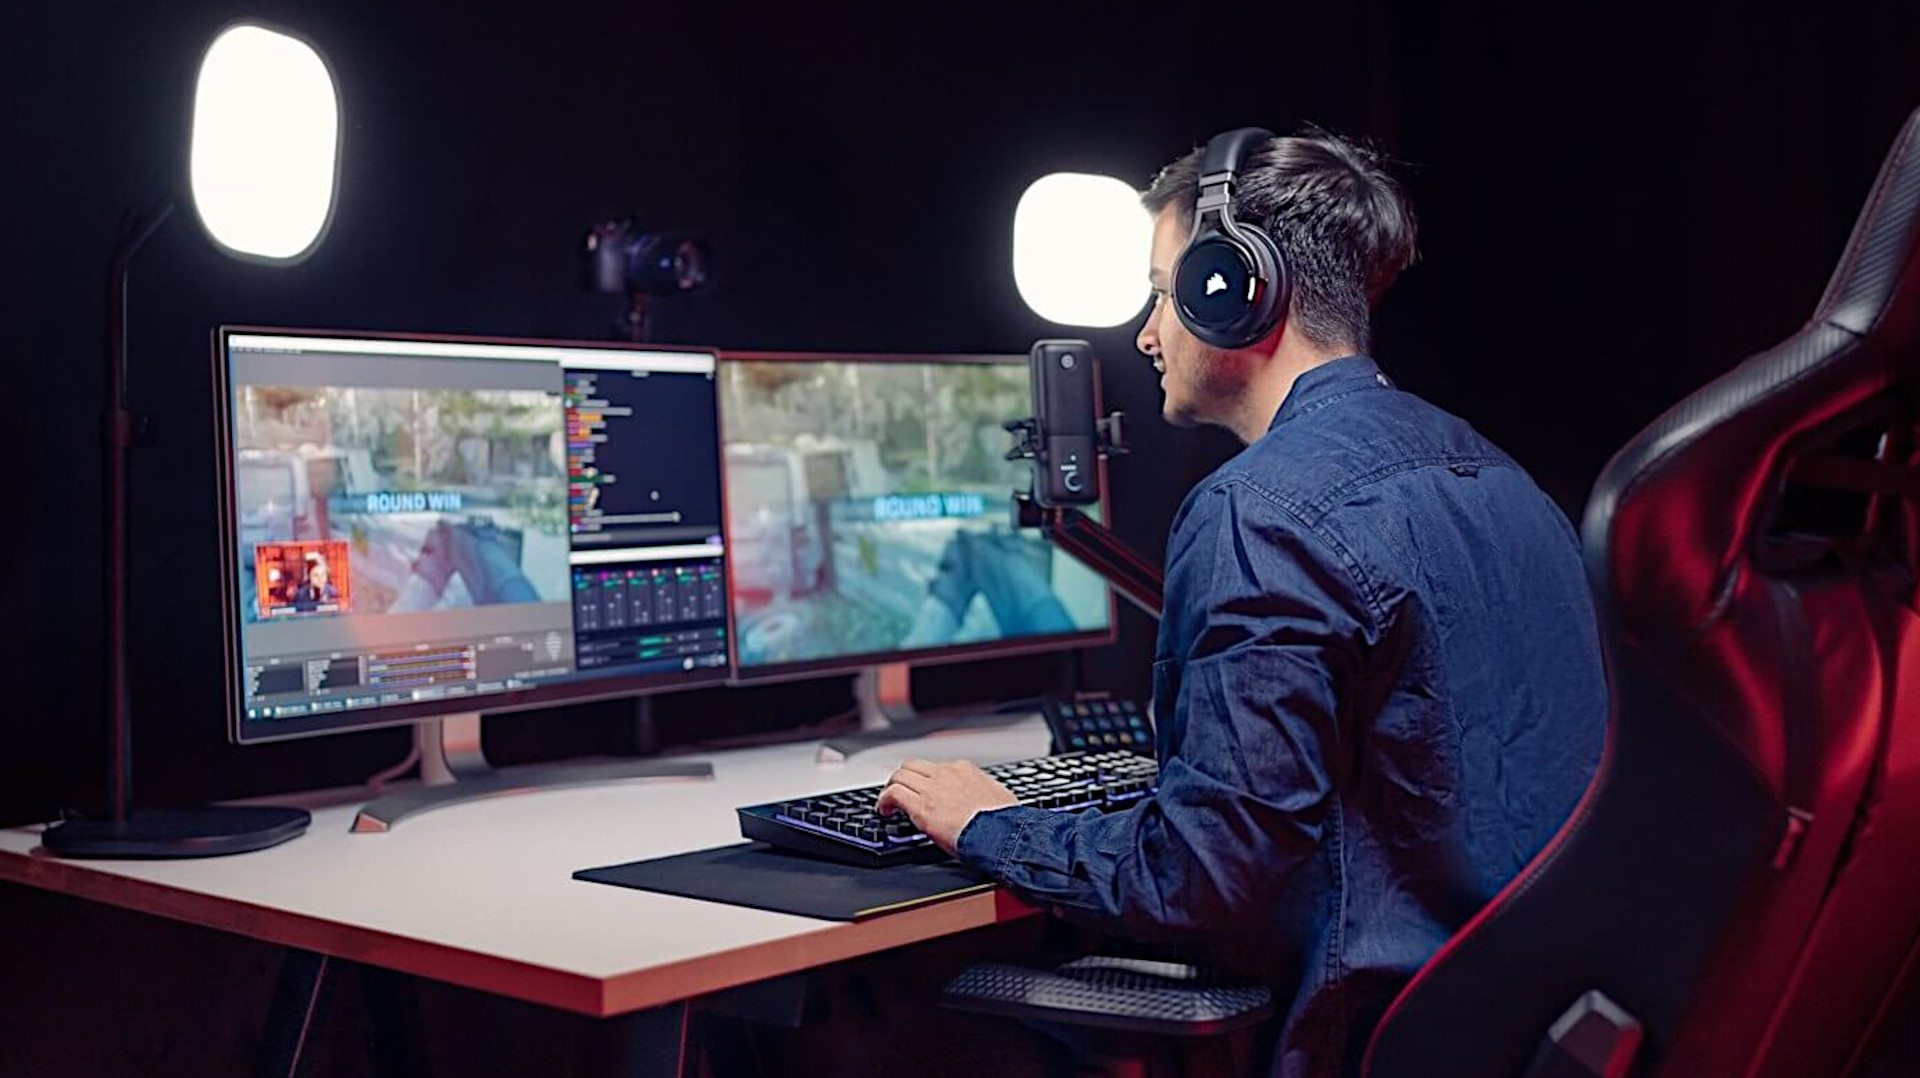 Nvidia Broadcast features come to Corsair iCue and Elgato software